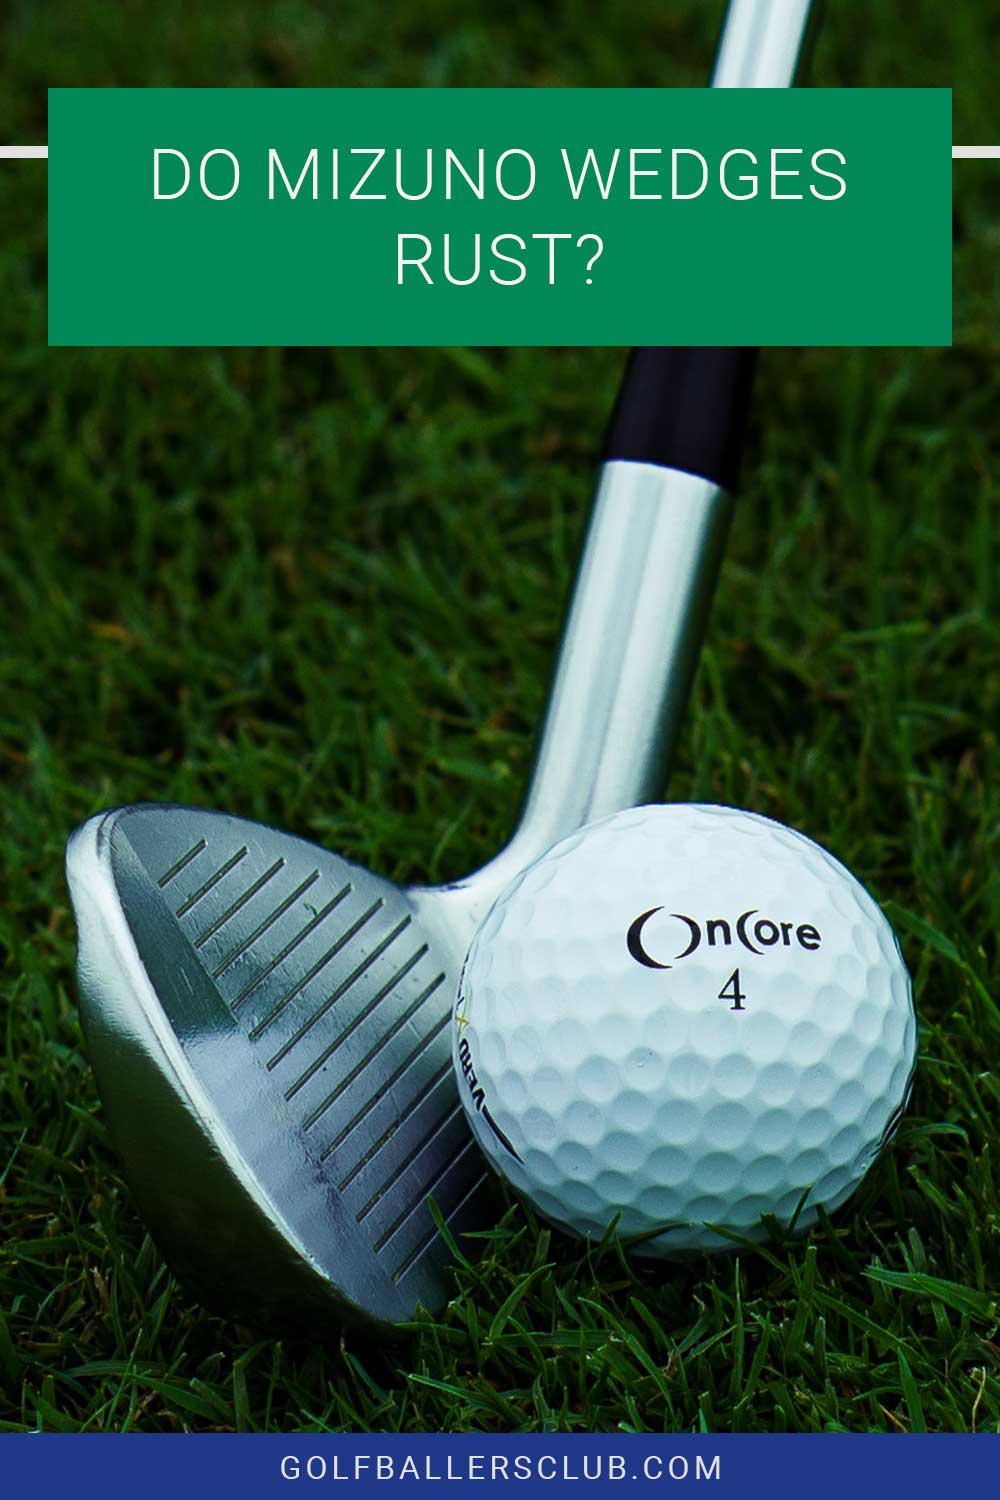 A golf ball being touched by a golf iron on grass - Do Mizuno Wedges Rust?